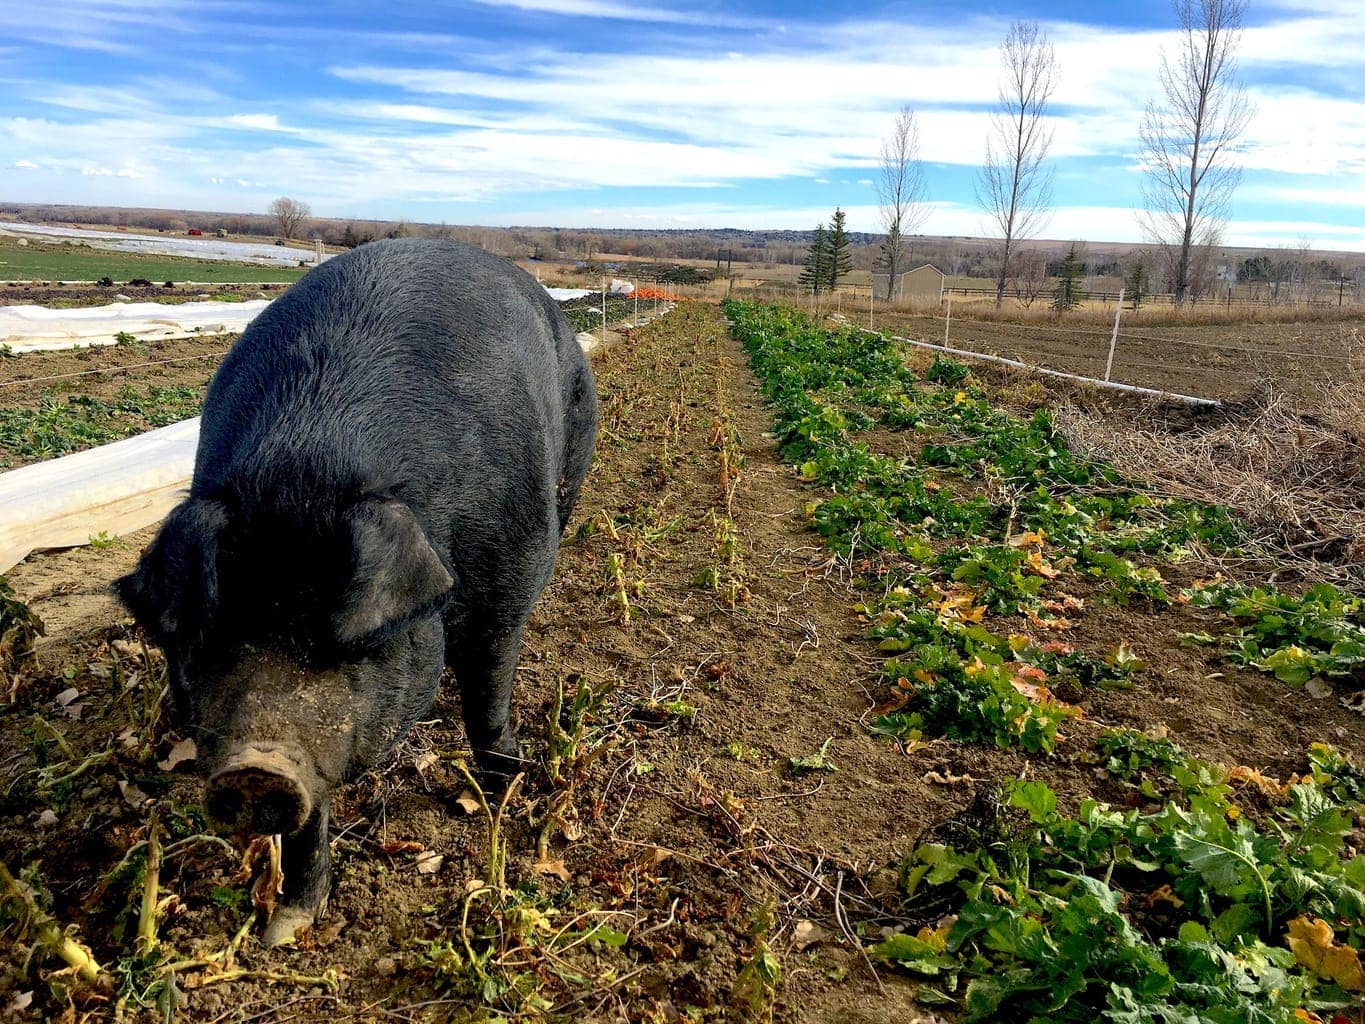 Pigs are central to the farm-to-table and biodynamic ethos of Black Cat Bistro and Bramble & Hare.